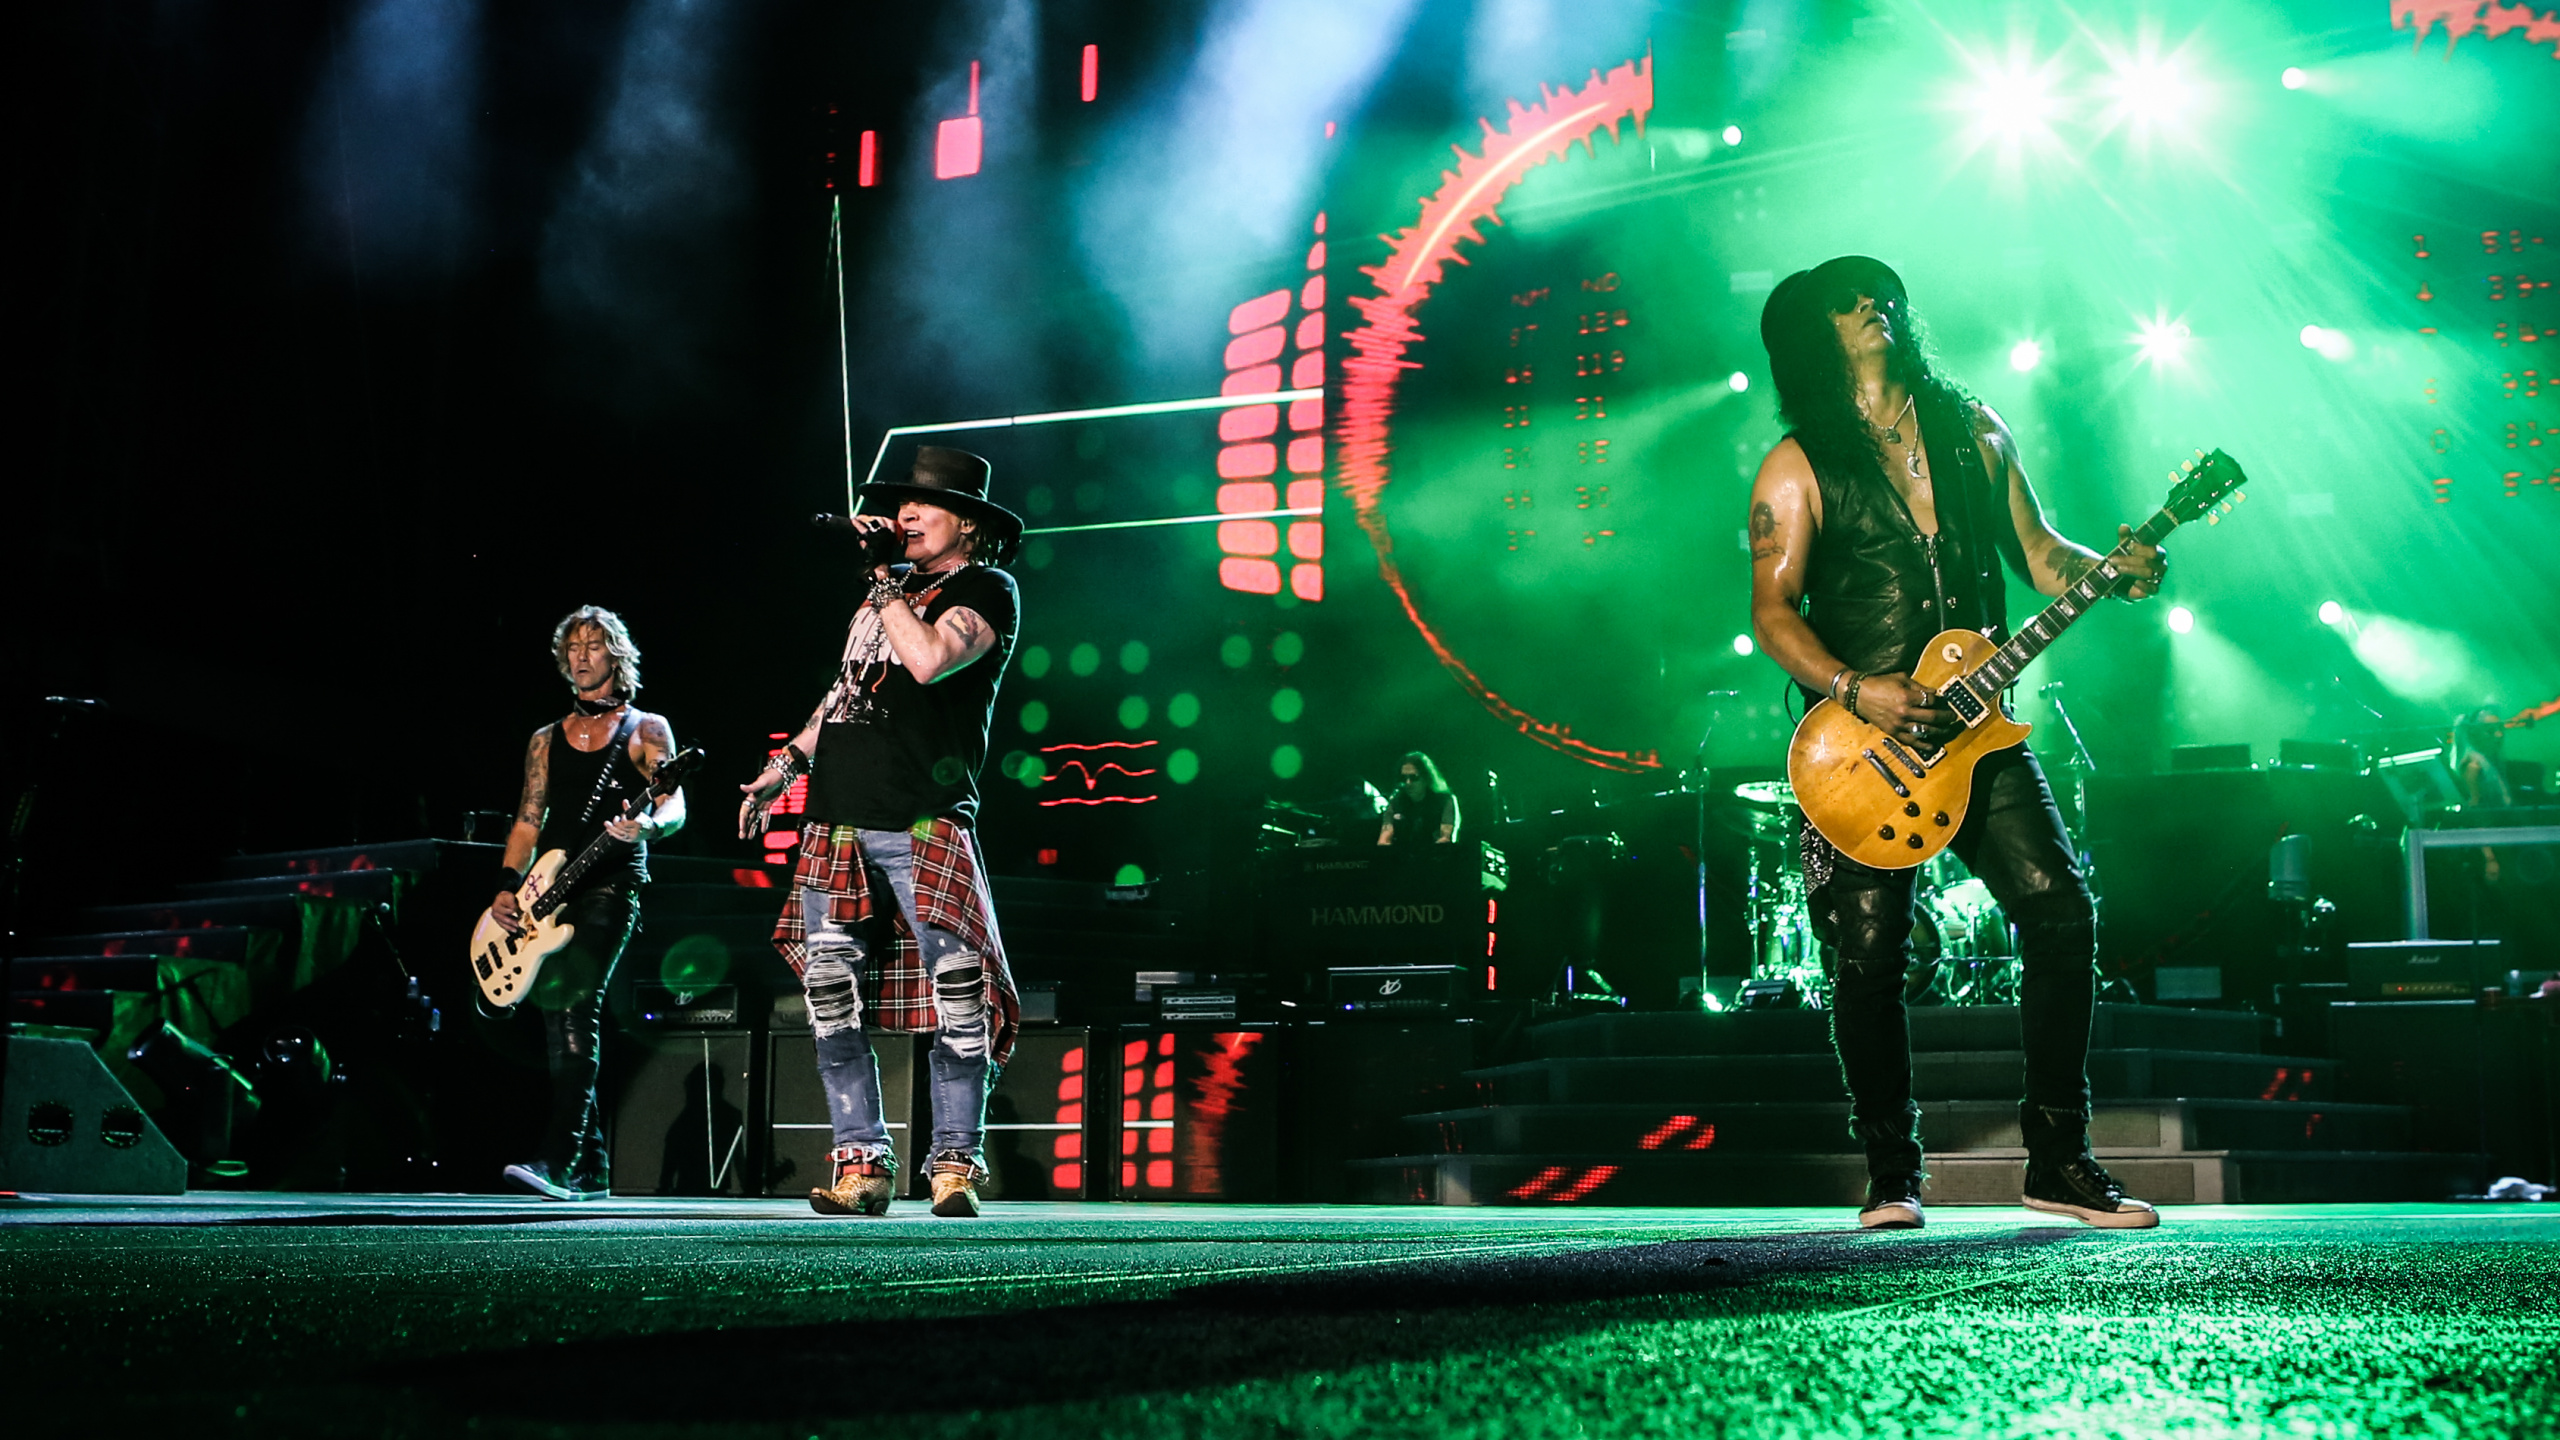 Not in This Lifetime Tour, Guns N Roses, Rock Concert, Performance, Entertainment. Wallpaper in 2560x1440 Resolution